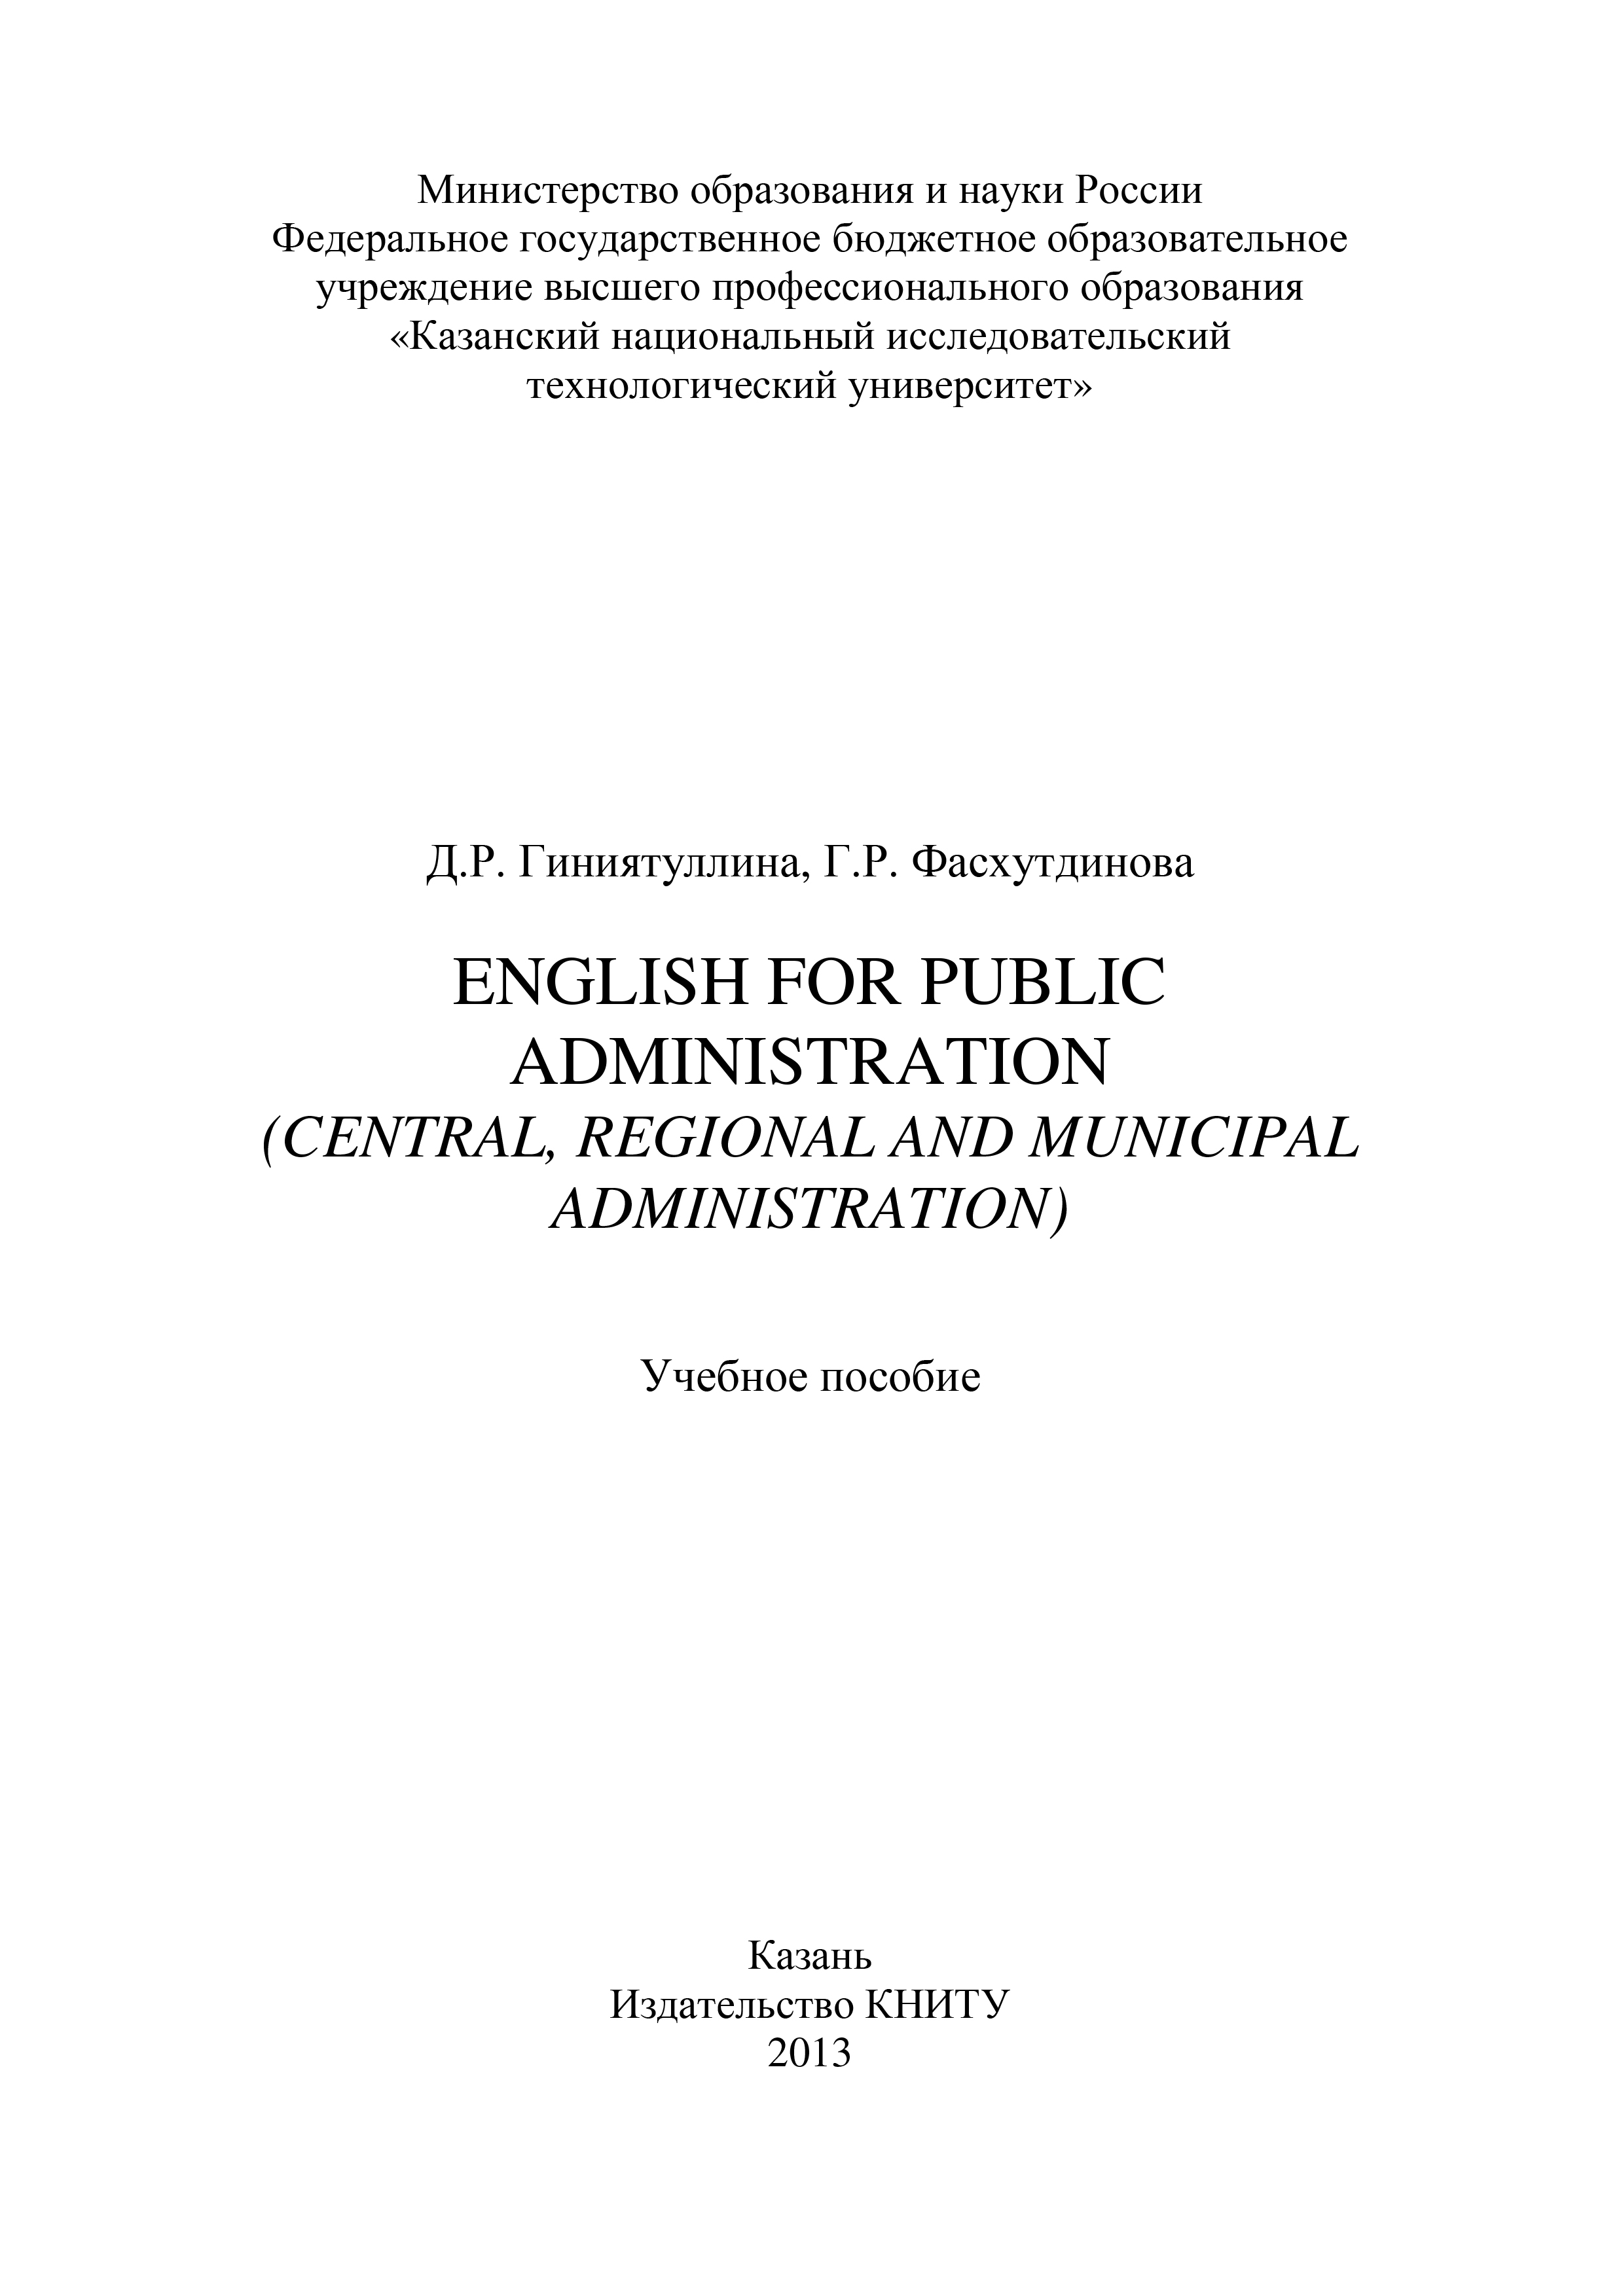 English for Public Administration (Central, Regional and Municipal Administration)